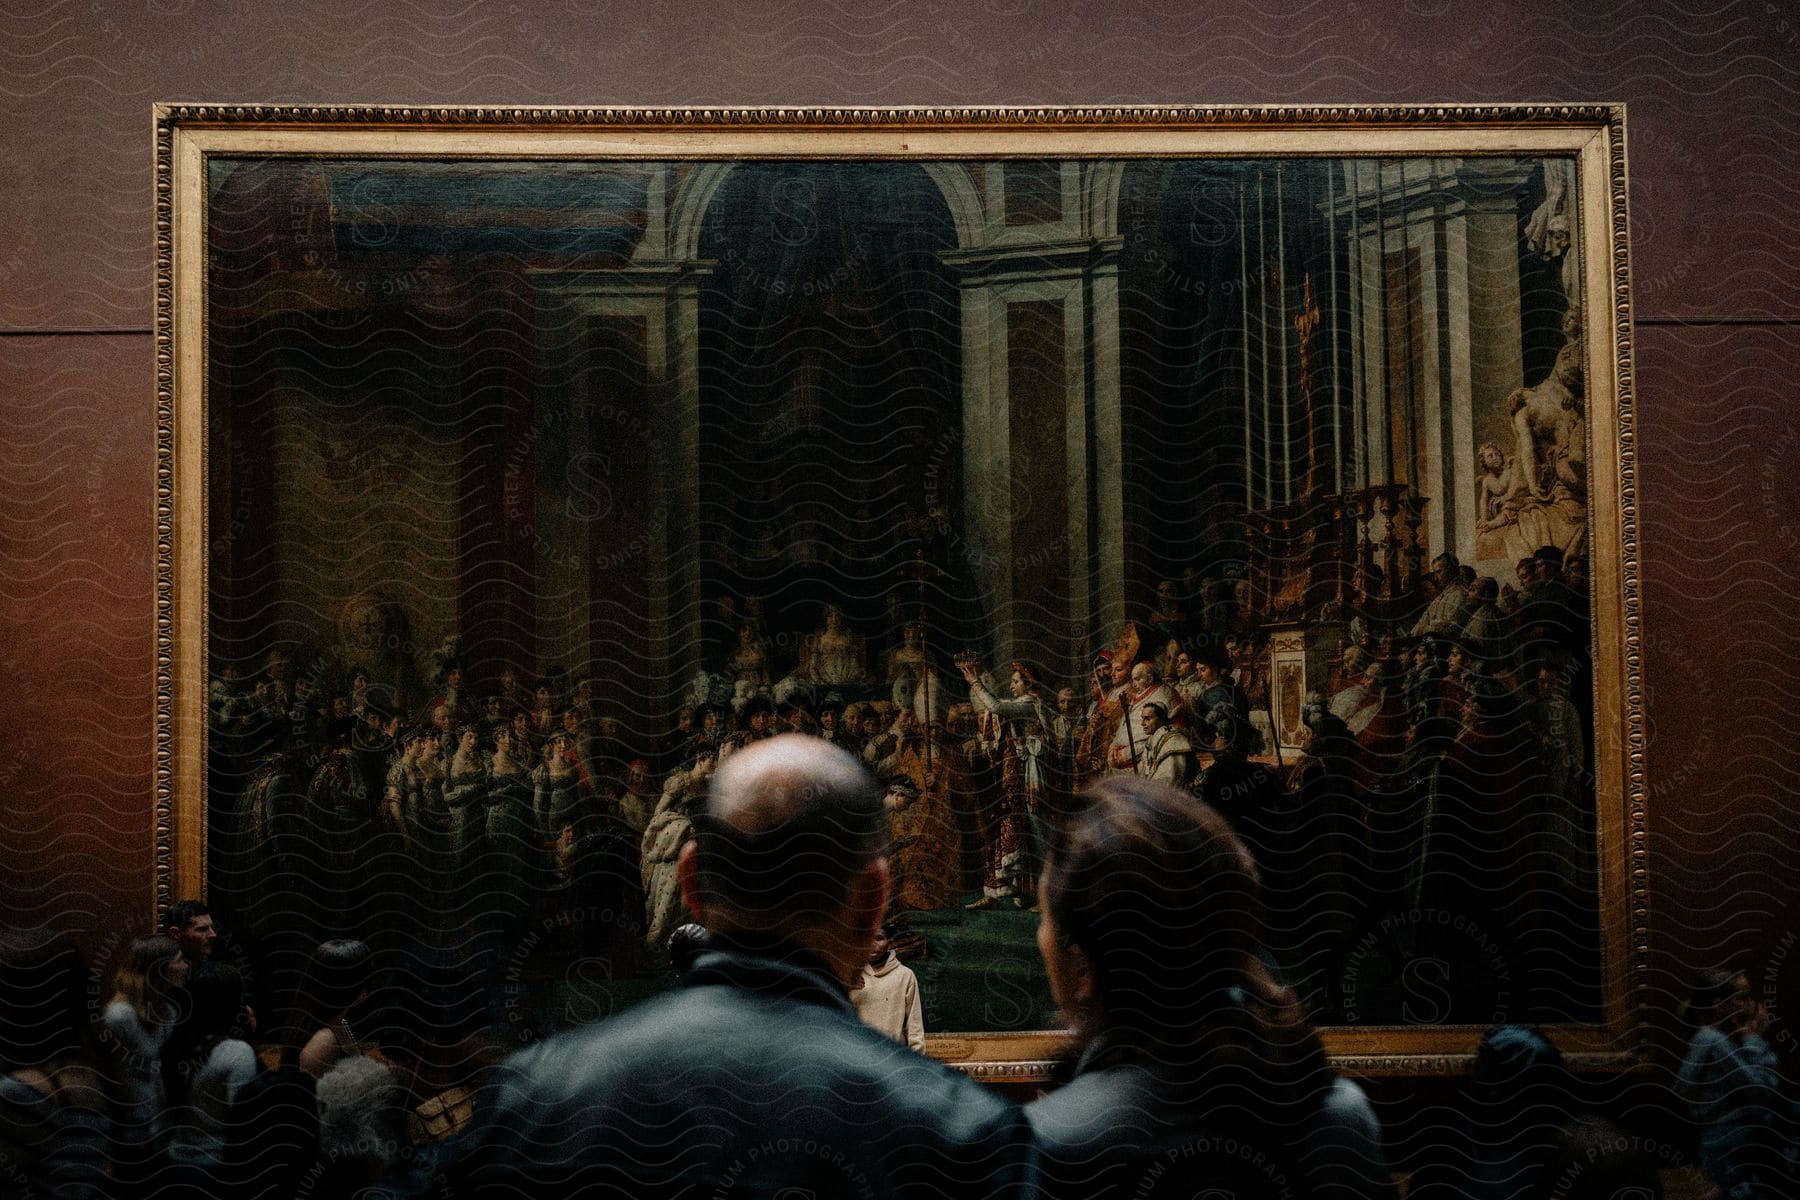 People at a museum looking at a large painting of a coronation.